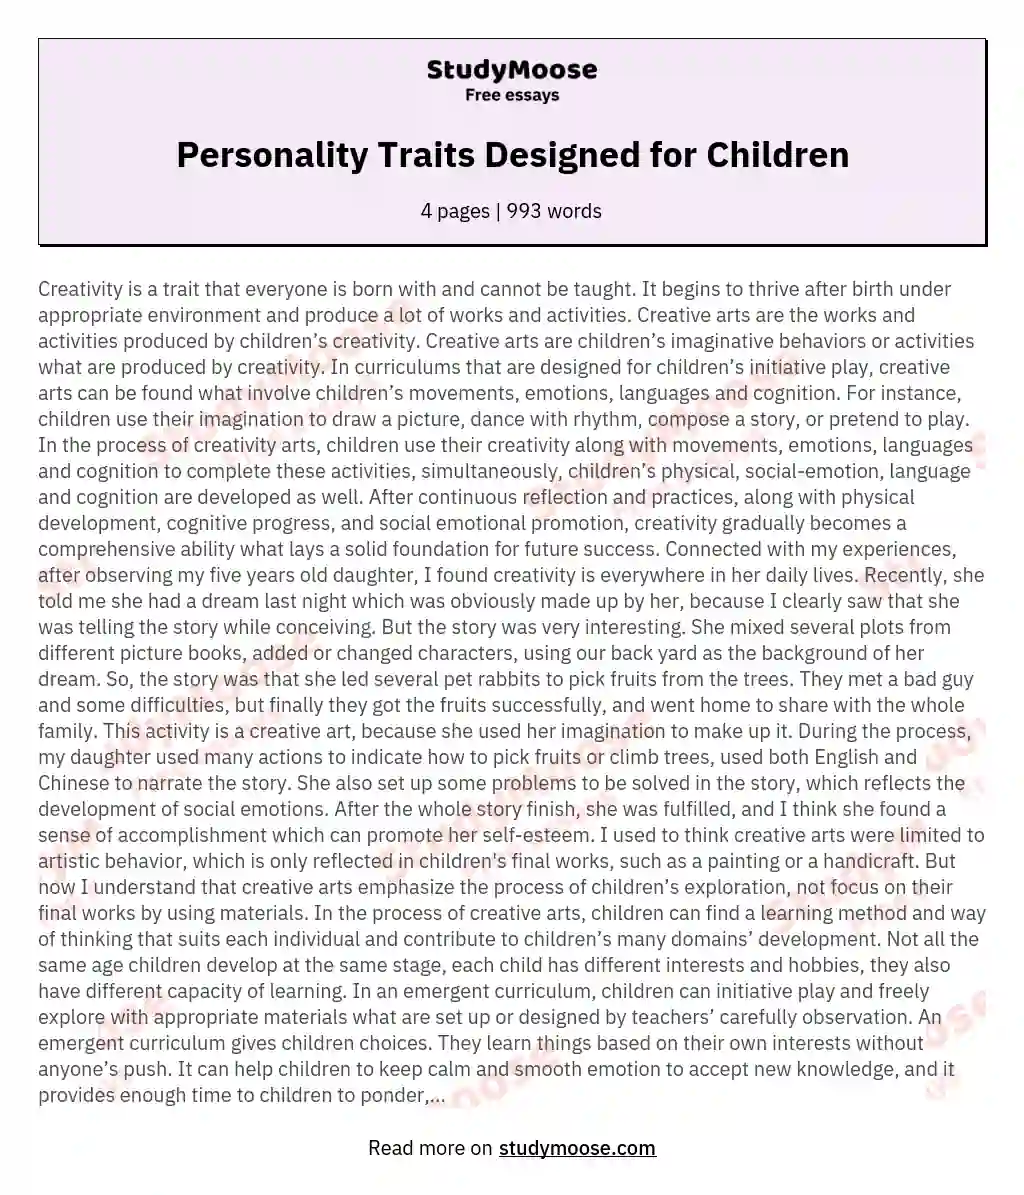 Personality Traits Designed for Children essay